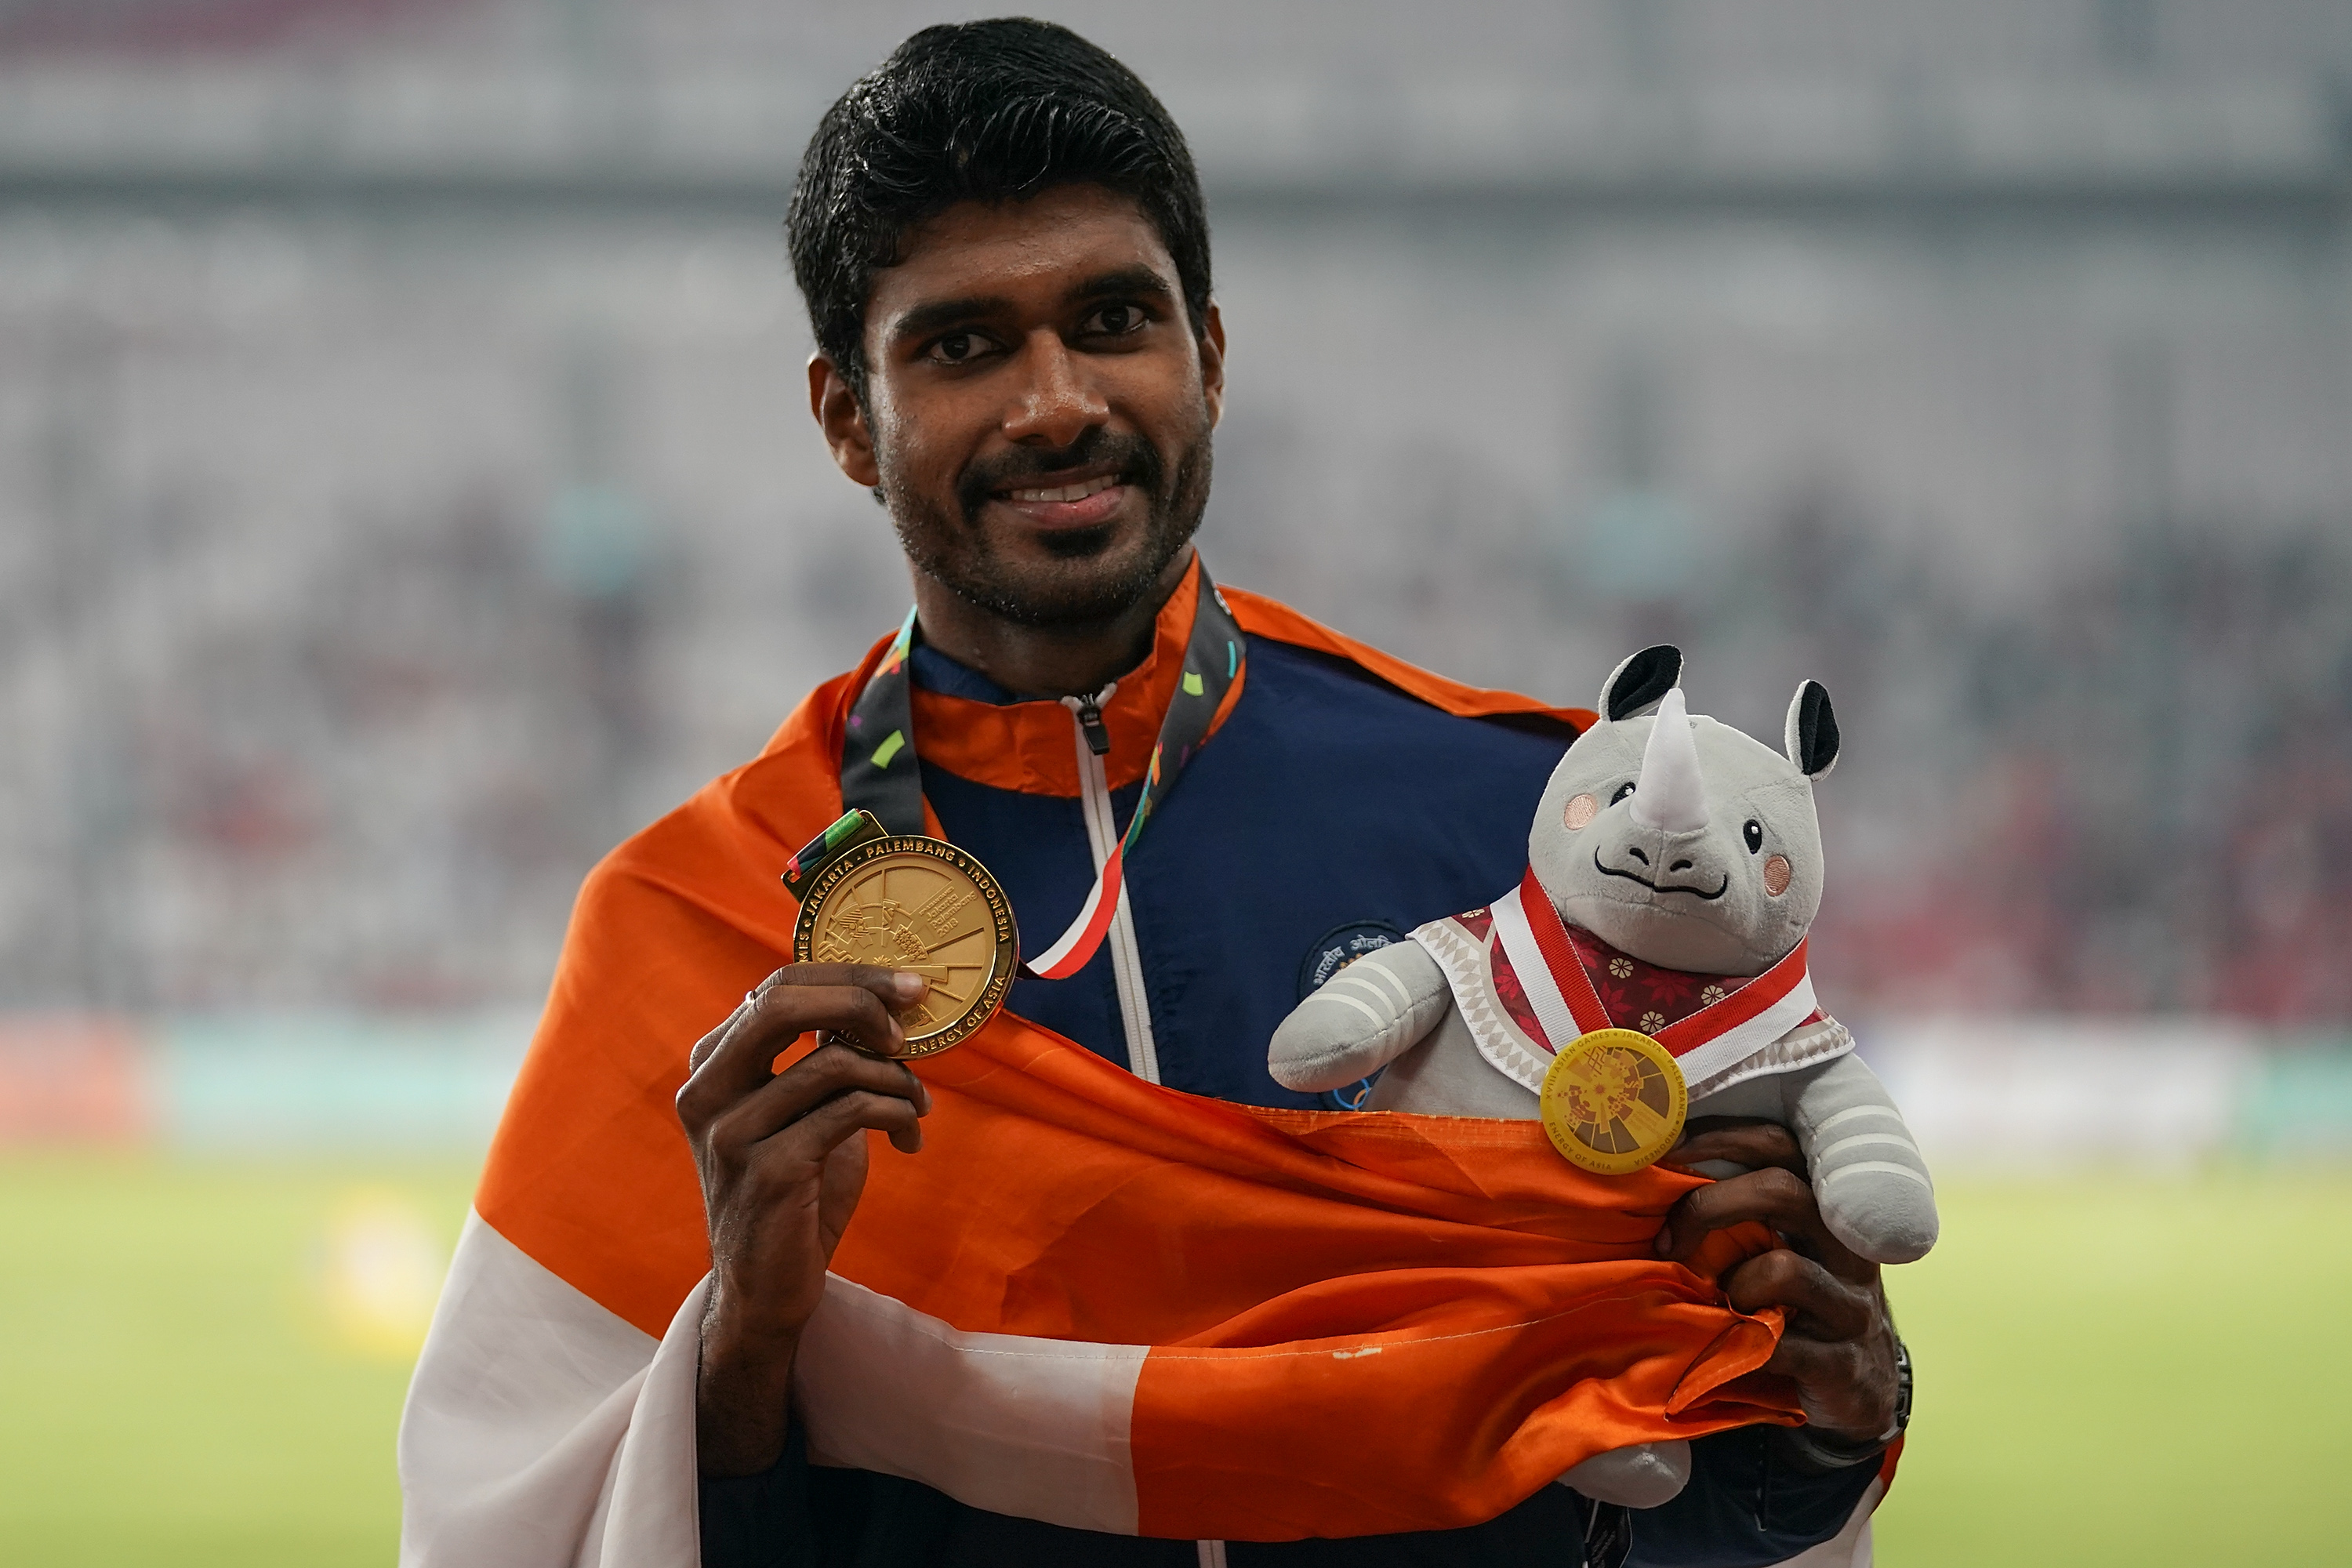 2021 Tokyo Olympics | Like to take part in good quality competitions abroad as preparations, asserts Jinson Johnson